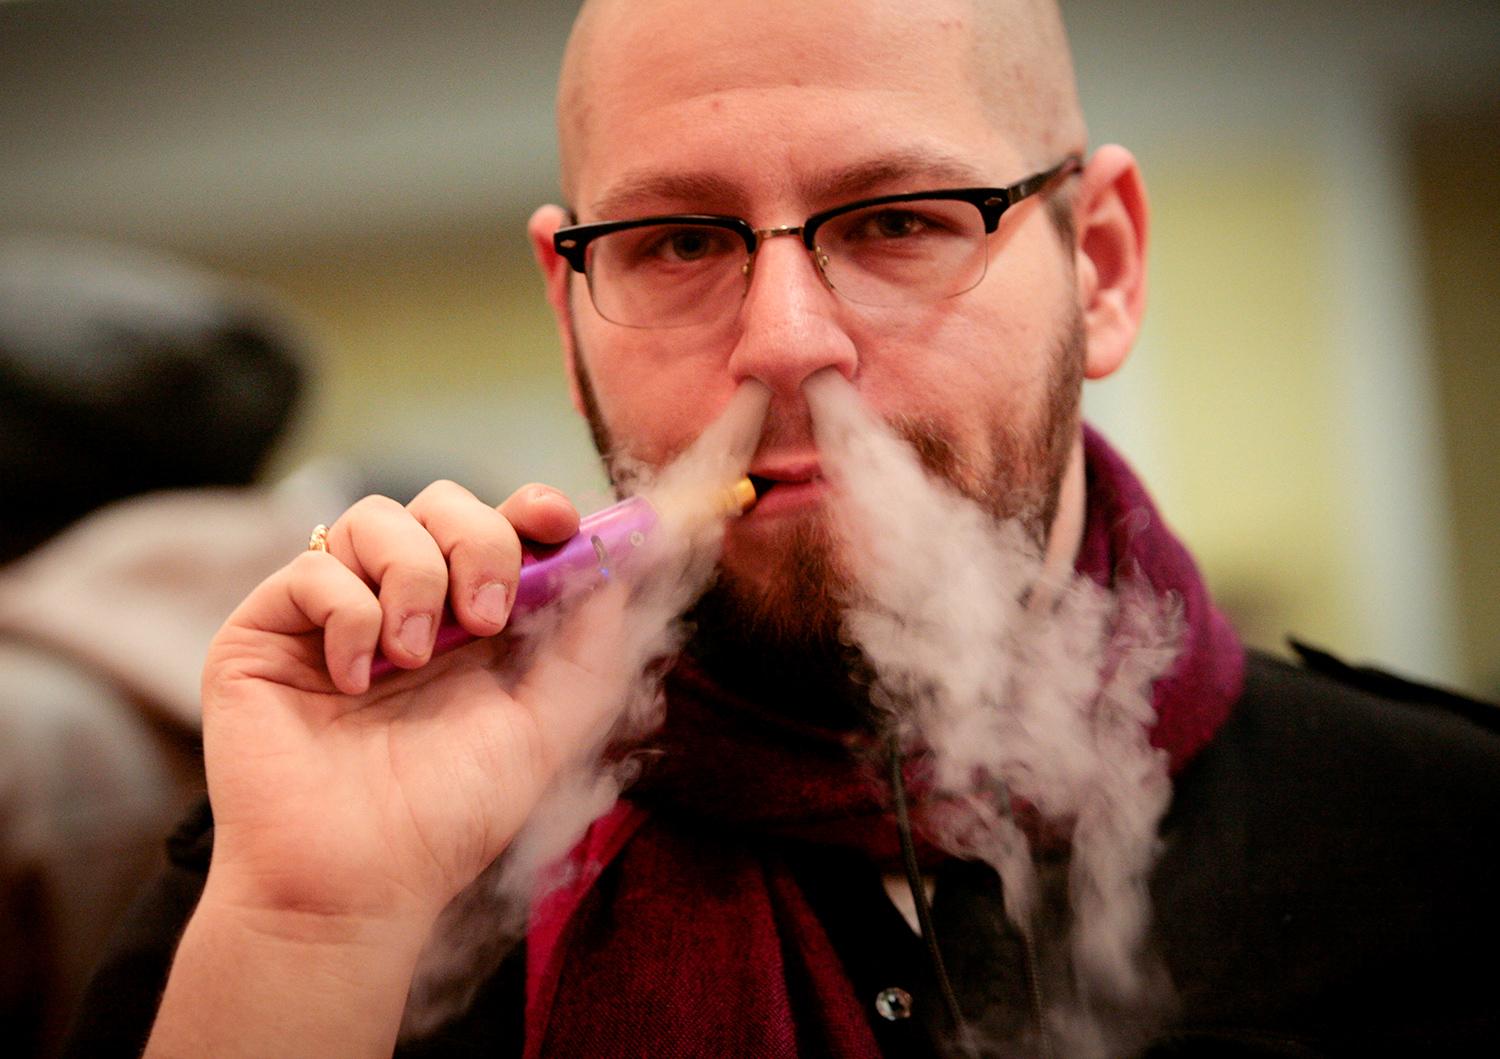 The great vape debate: are e-cigarettes saving smokers or creating